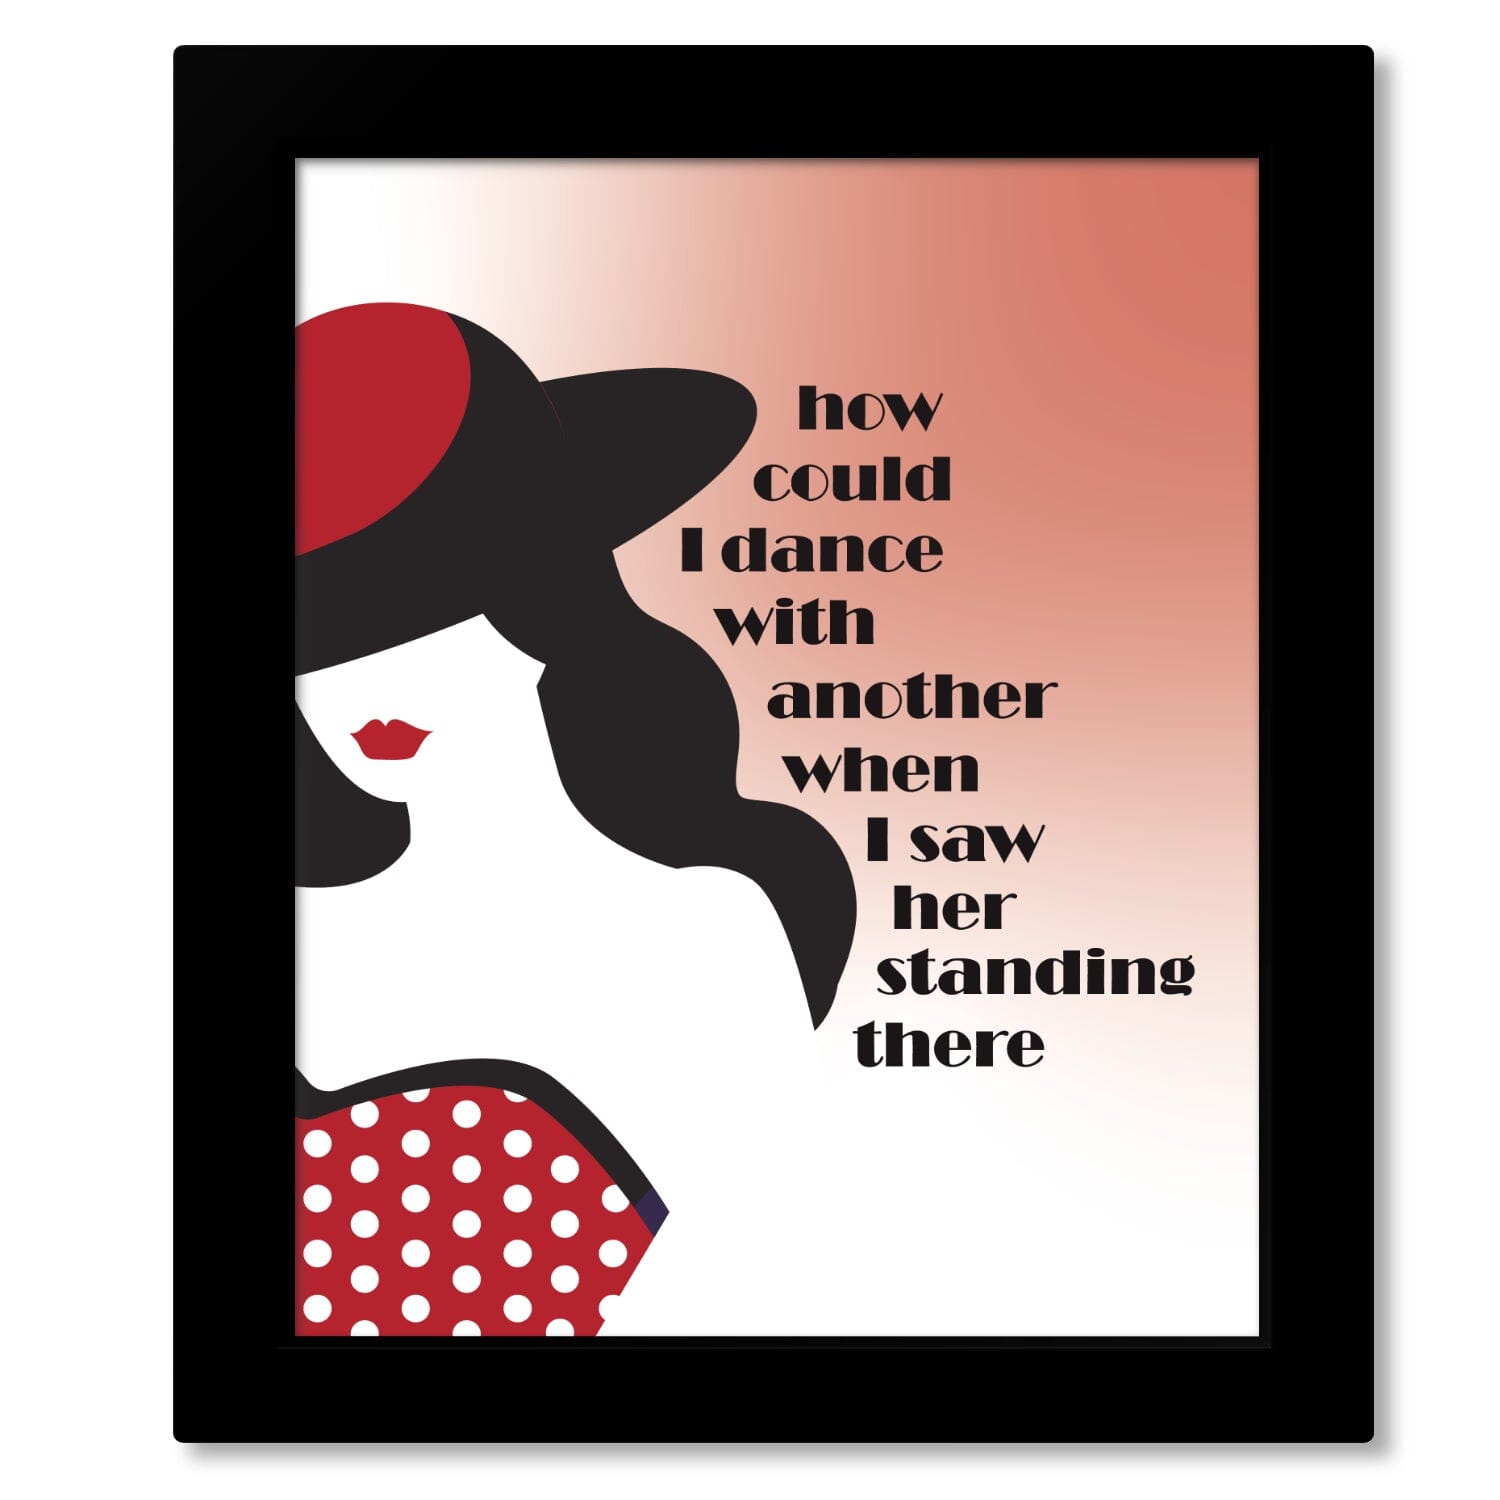 I Saw Her Standing There by the Beatles - Song Lyrics Print Song Lyrics Art Song Lyrics Art 8x10 Framed Print (without mat) 